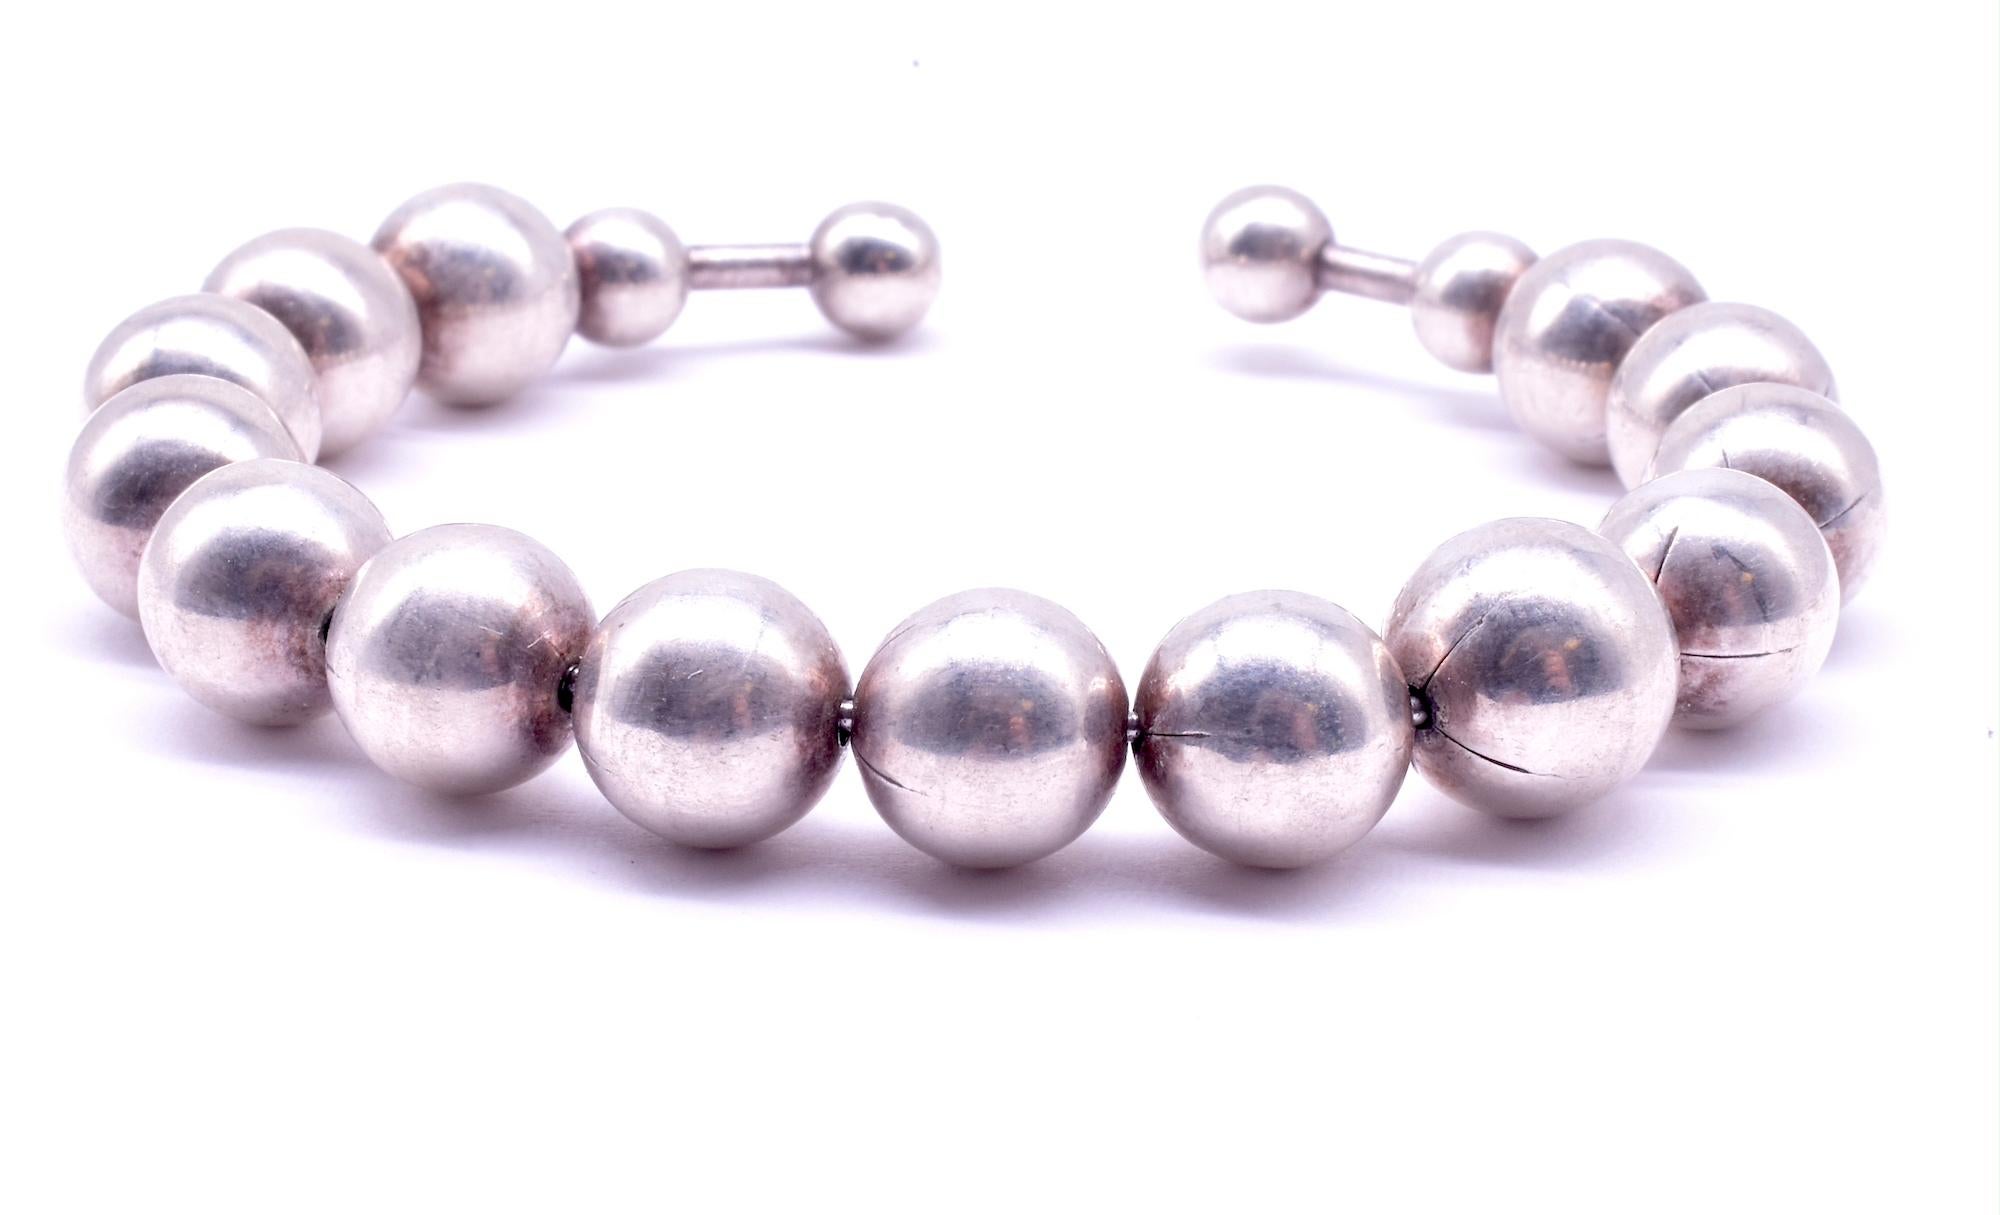 Retro set of graduated sterling balls mounted on a flexible wire that fits a small to medium sized wrist. A great bracelet to wear casually with others for a boho 